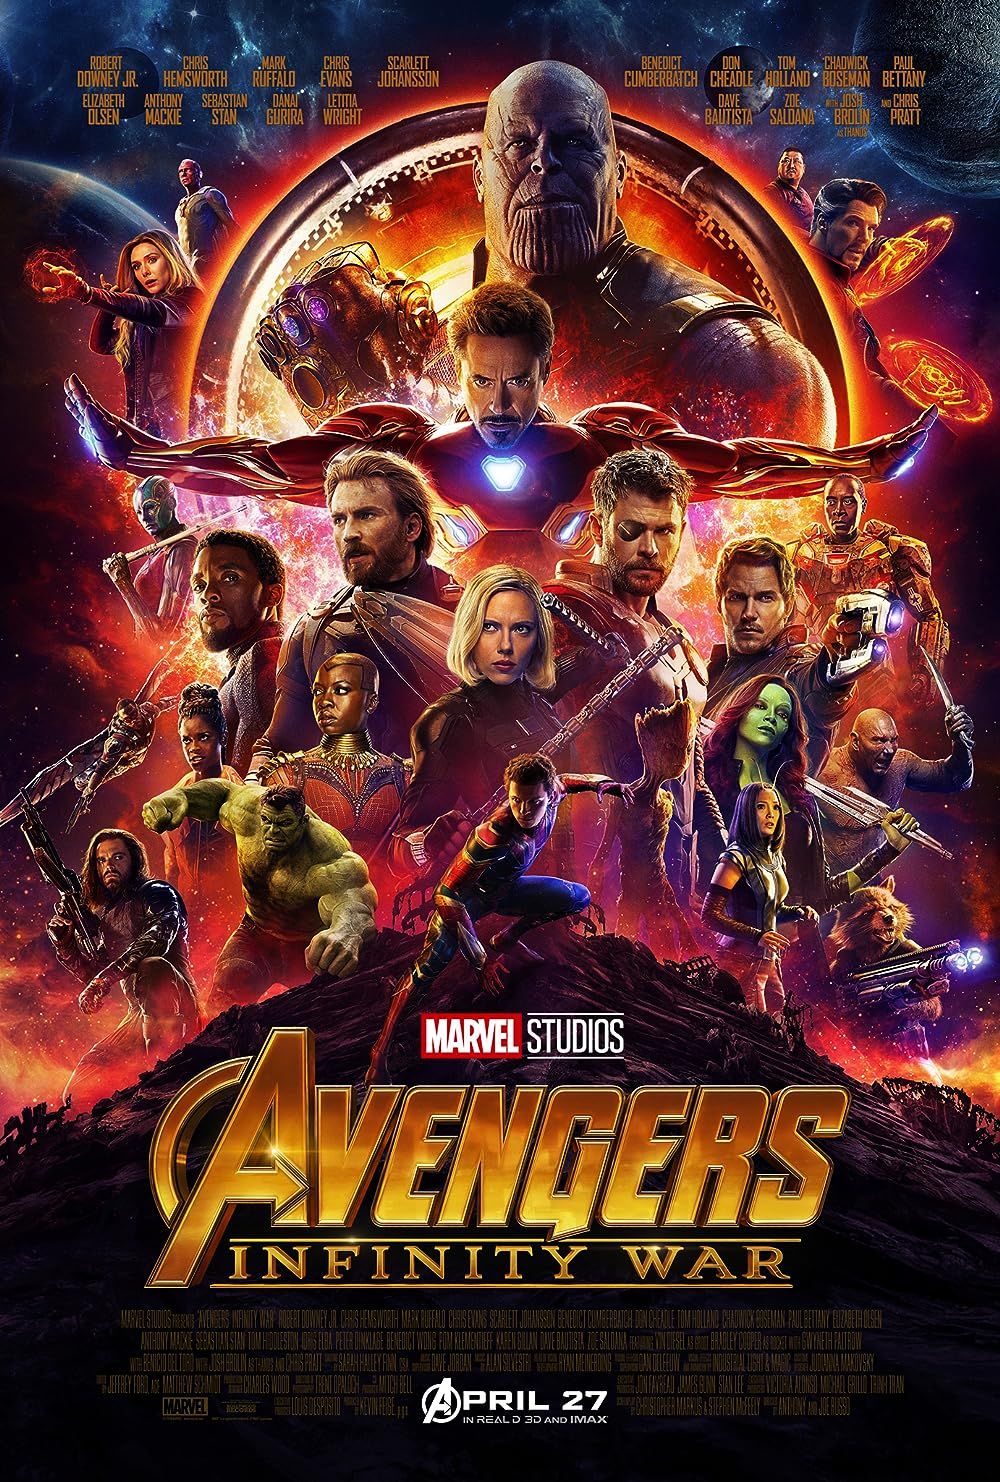 The cast of Avengers Infinity War on the movie poster